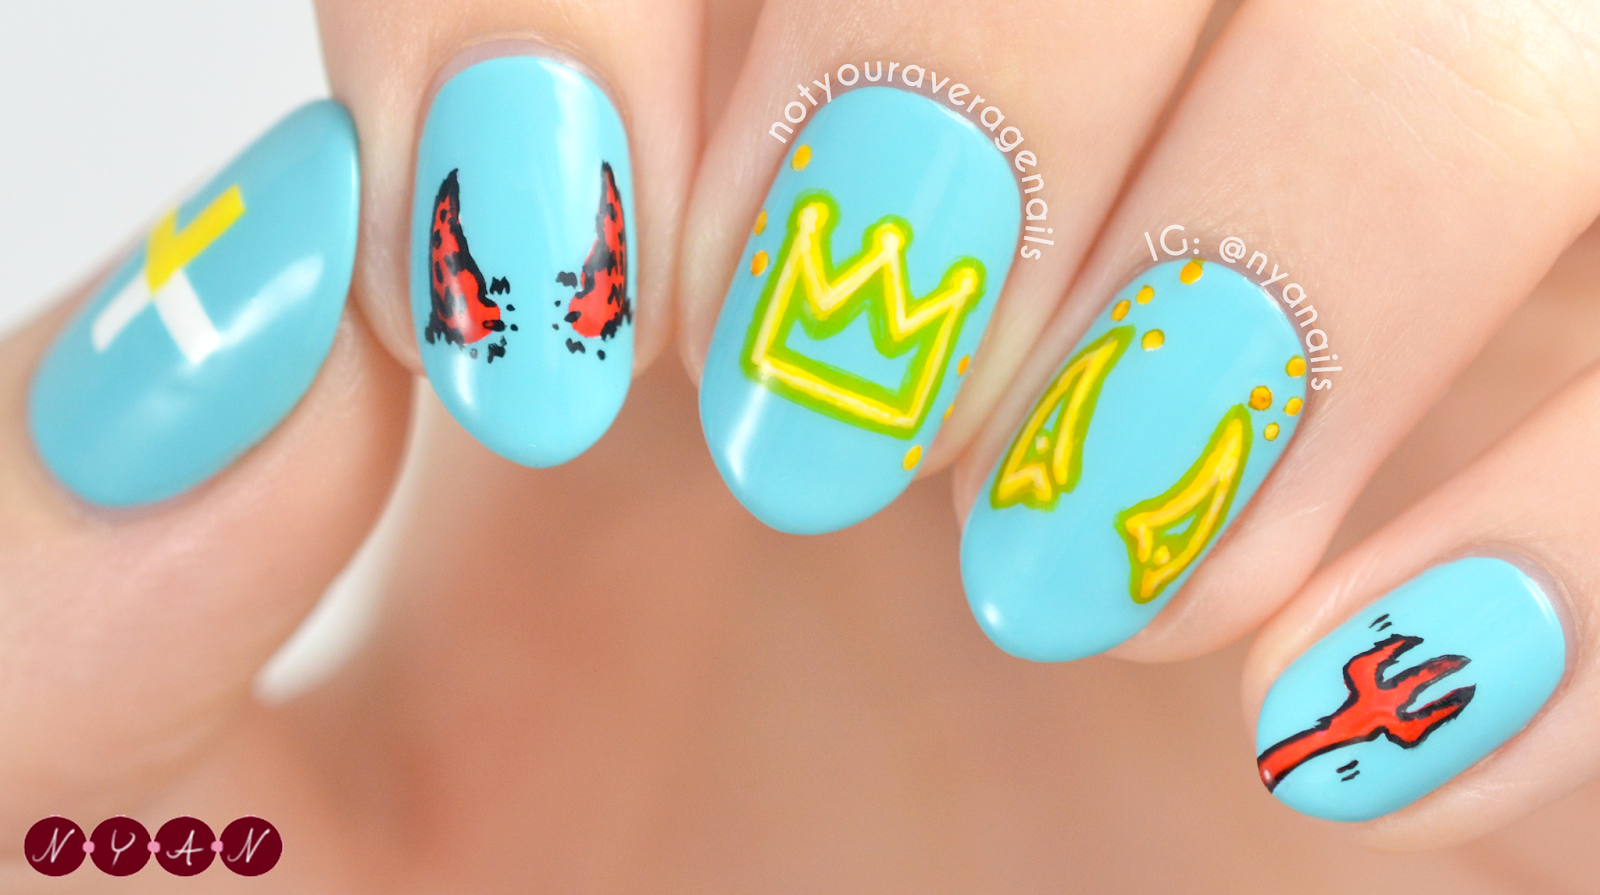 4. "Crown Nail Art Tutorial with Rhinestones and Glitter" - wide 7